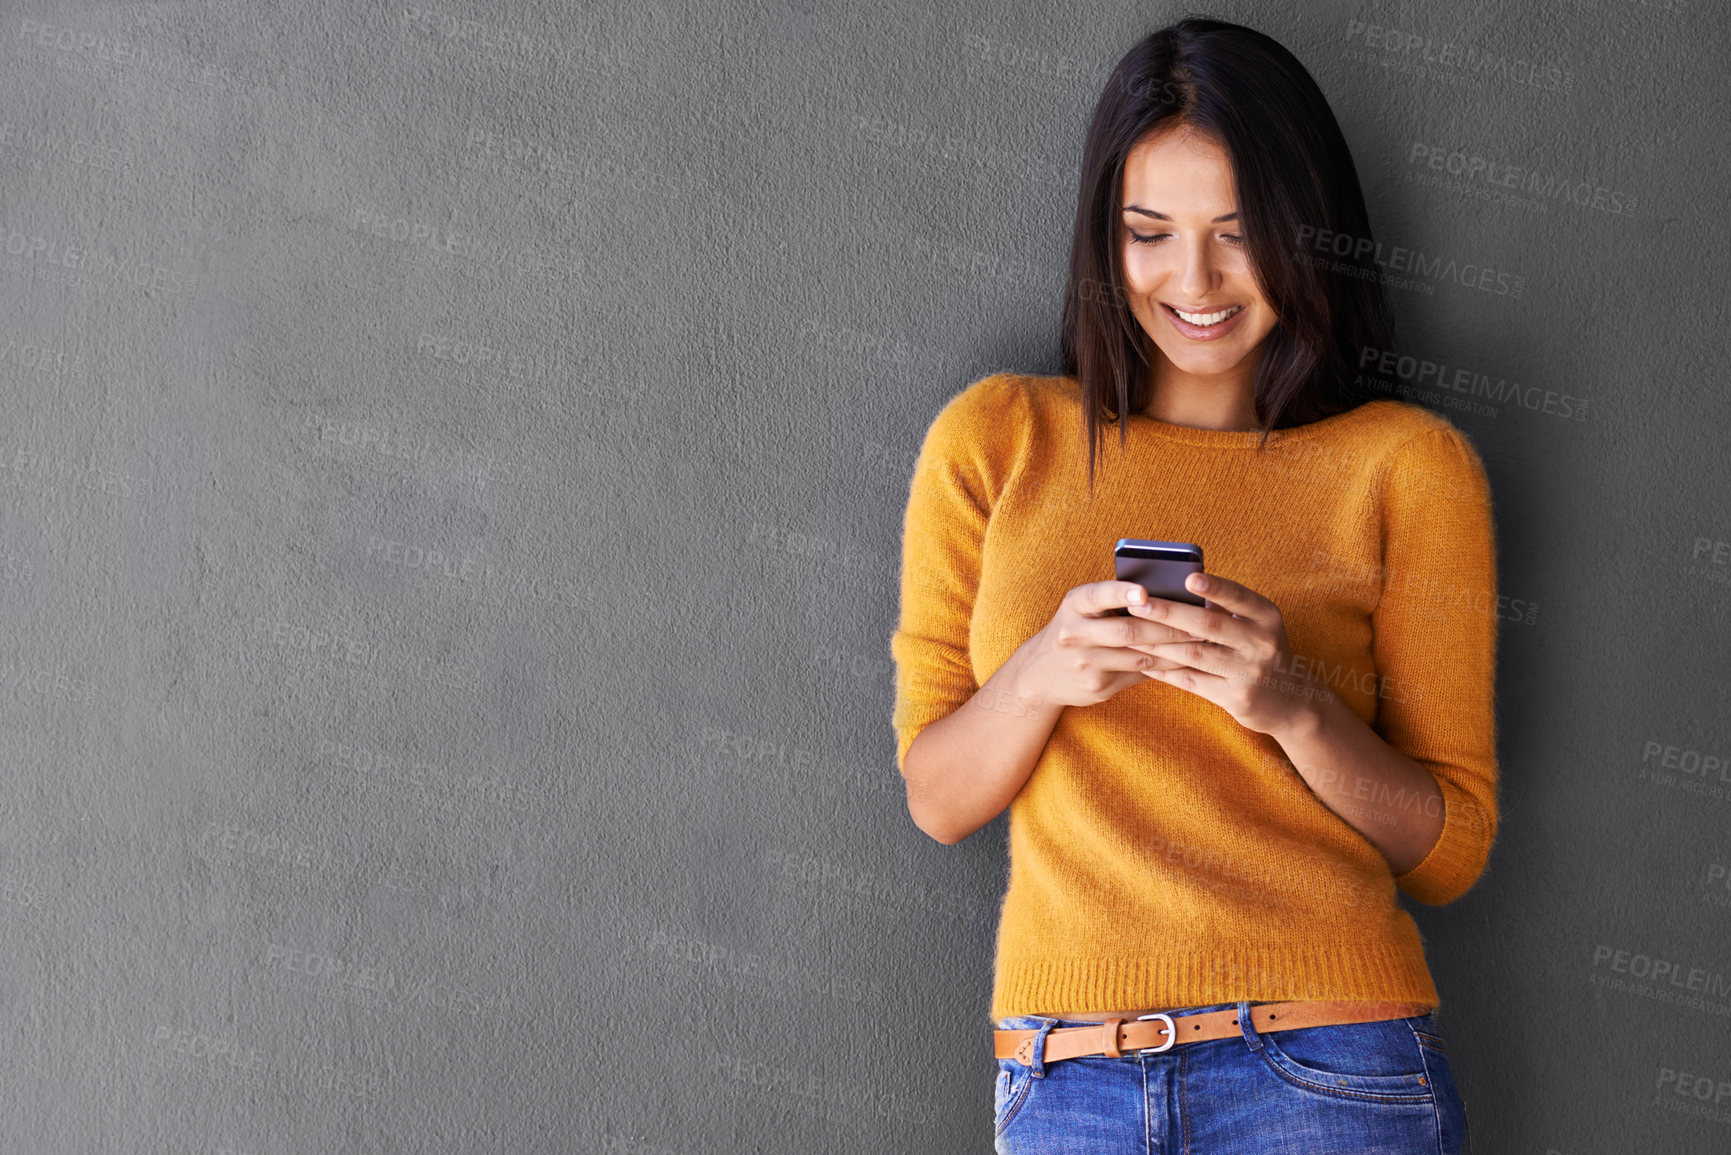 Buy stock photo An attractive young woman using a mobile phone while standing against a gray wall